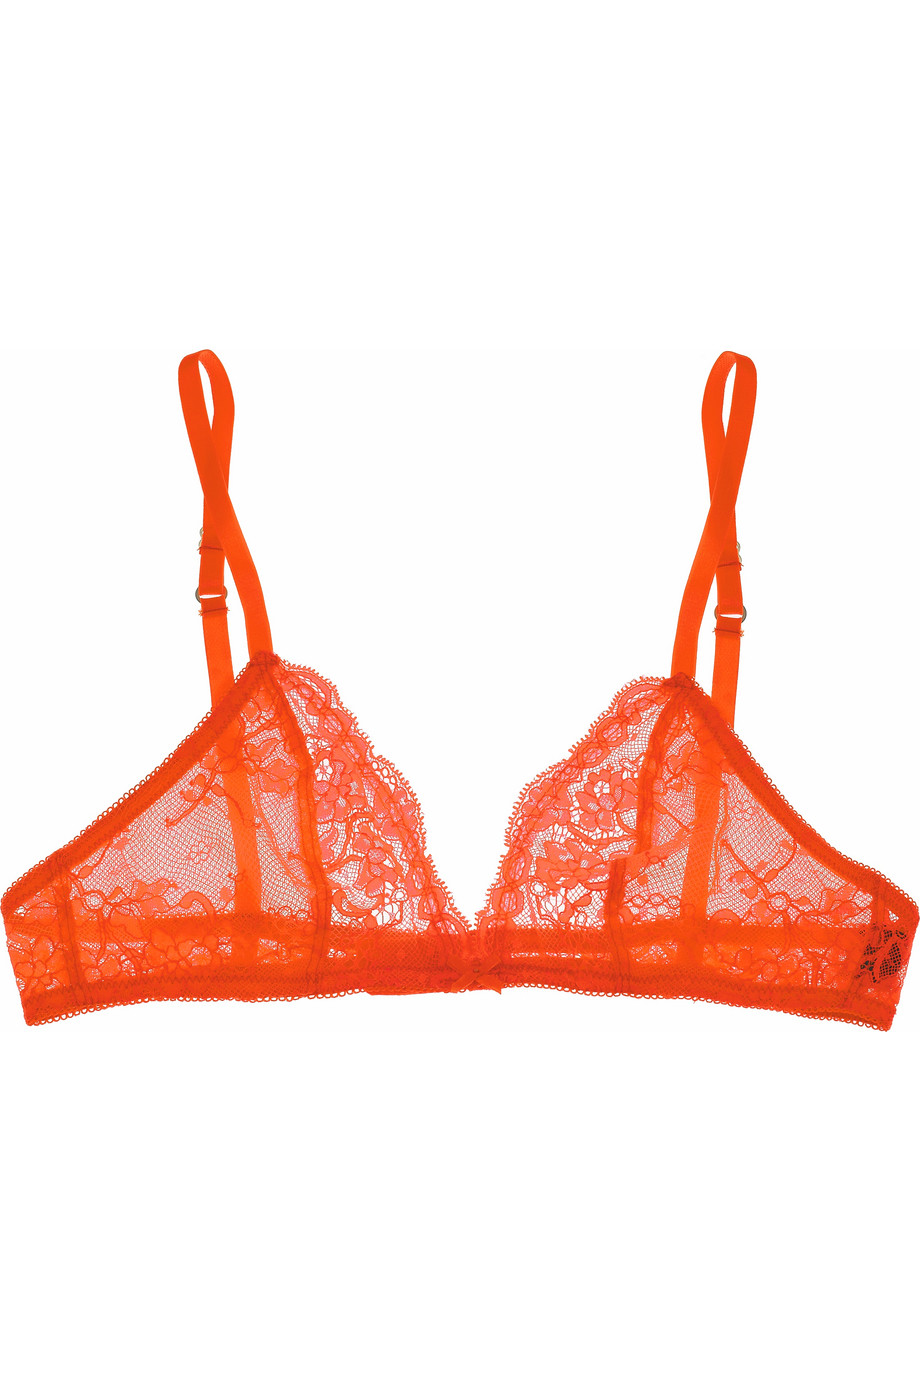 Lyst - Deborah marquit French Lace Soft-cup Bra in Orange